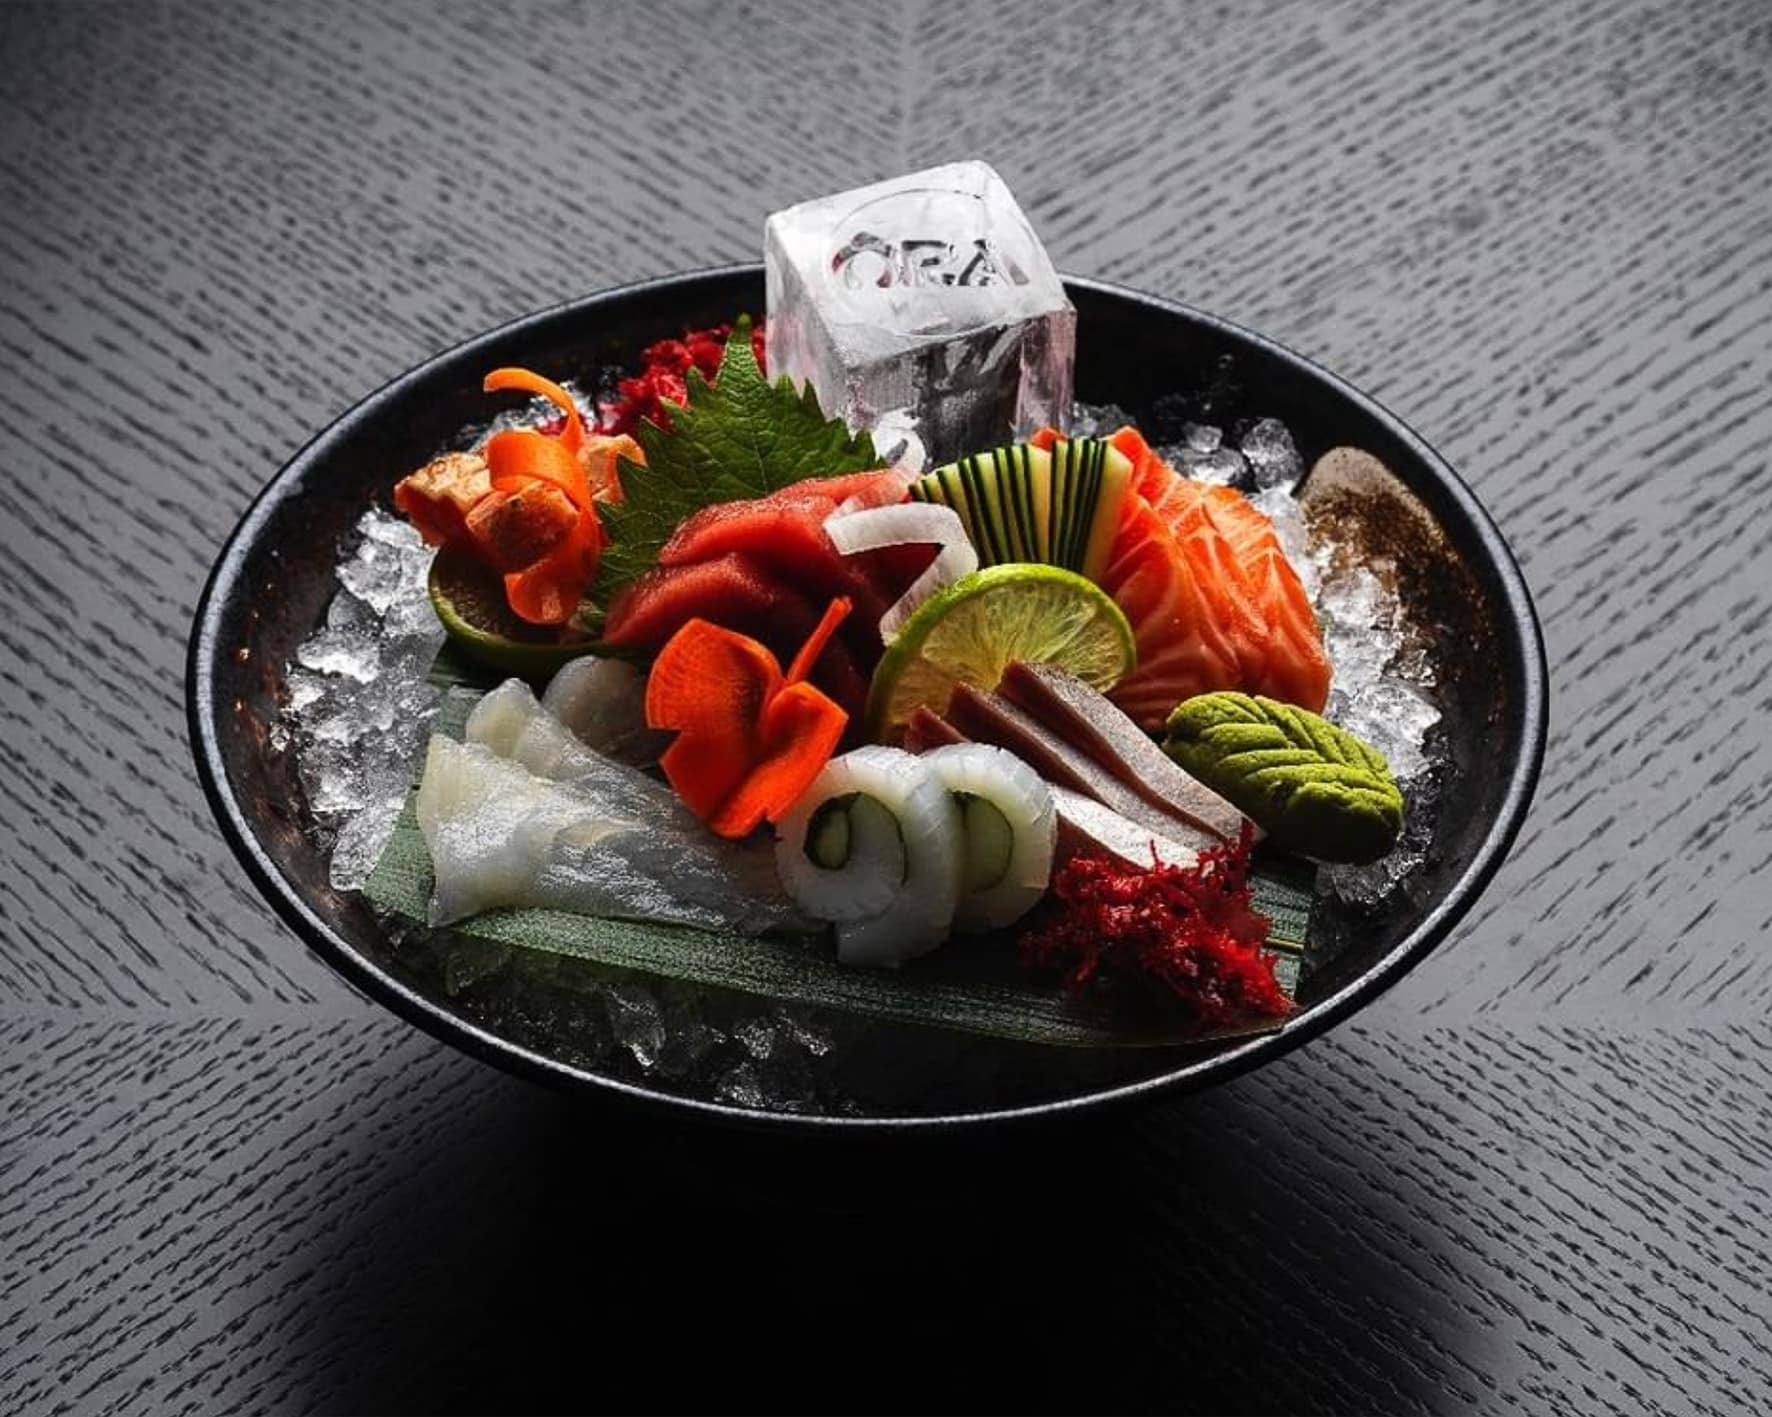 A black bowl sitting on a black wood surface, filled with a variety of glistening fresh sushi and sashimi. A large ice cube with the Ōra logo engraved into it is nestled amongst the sushi and sashimi.